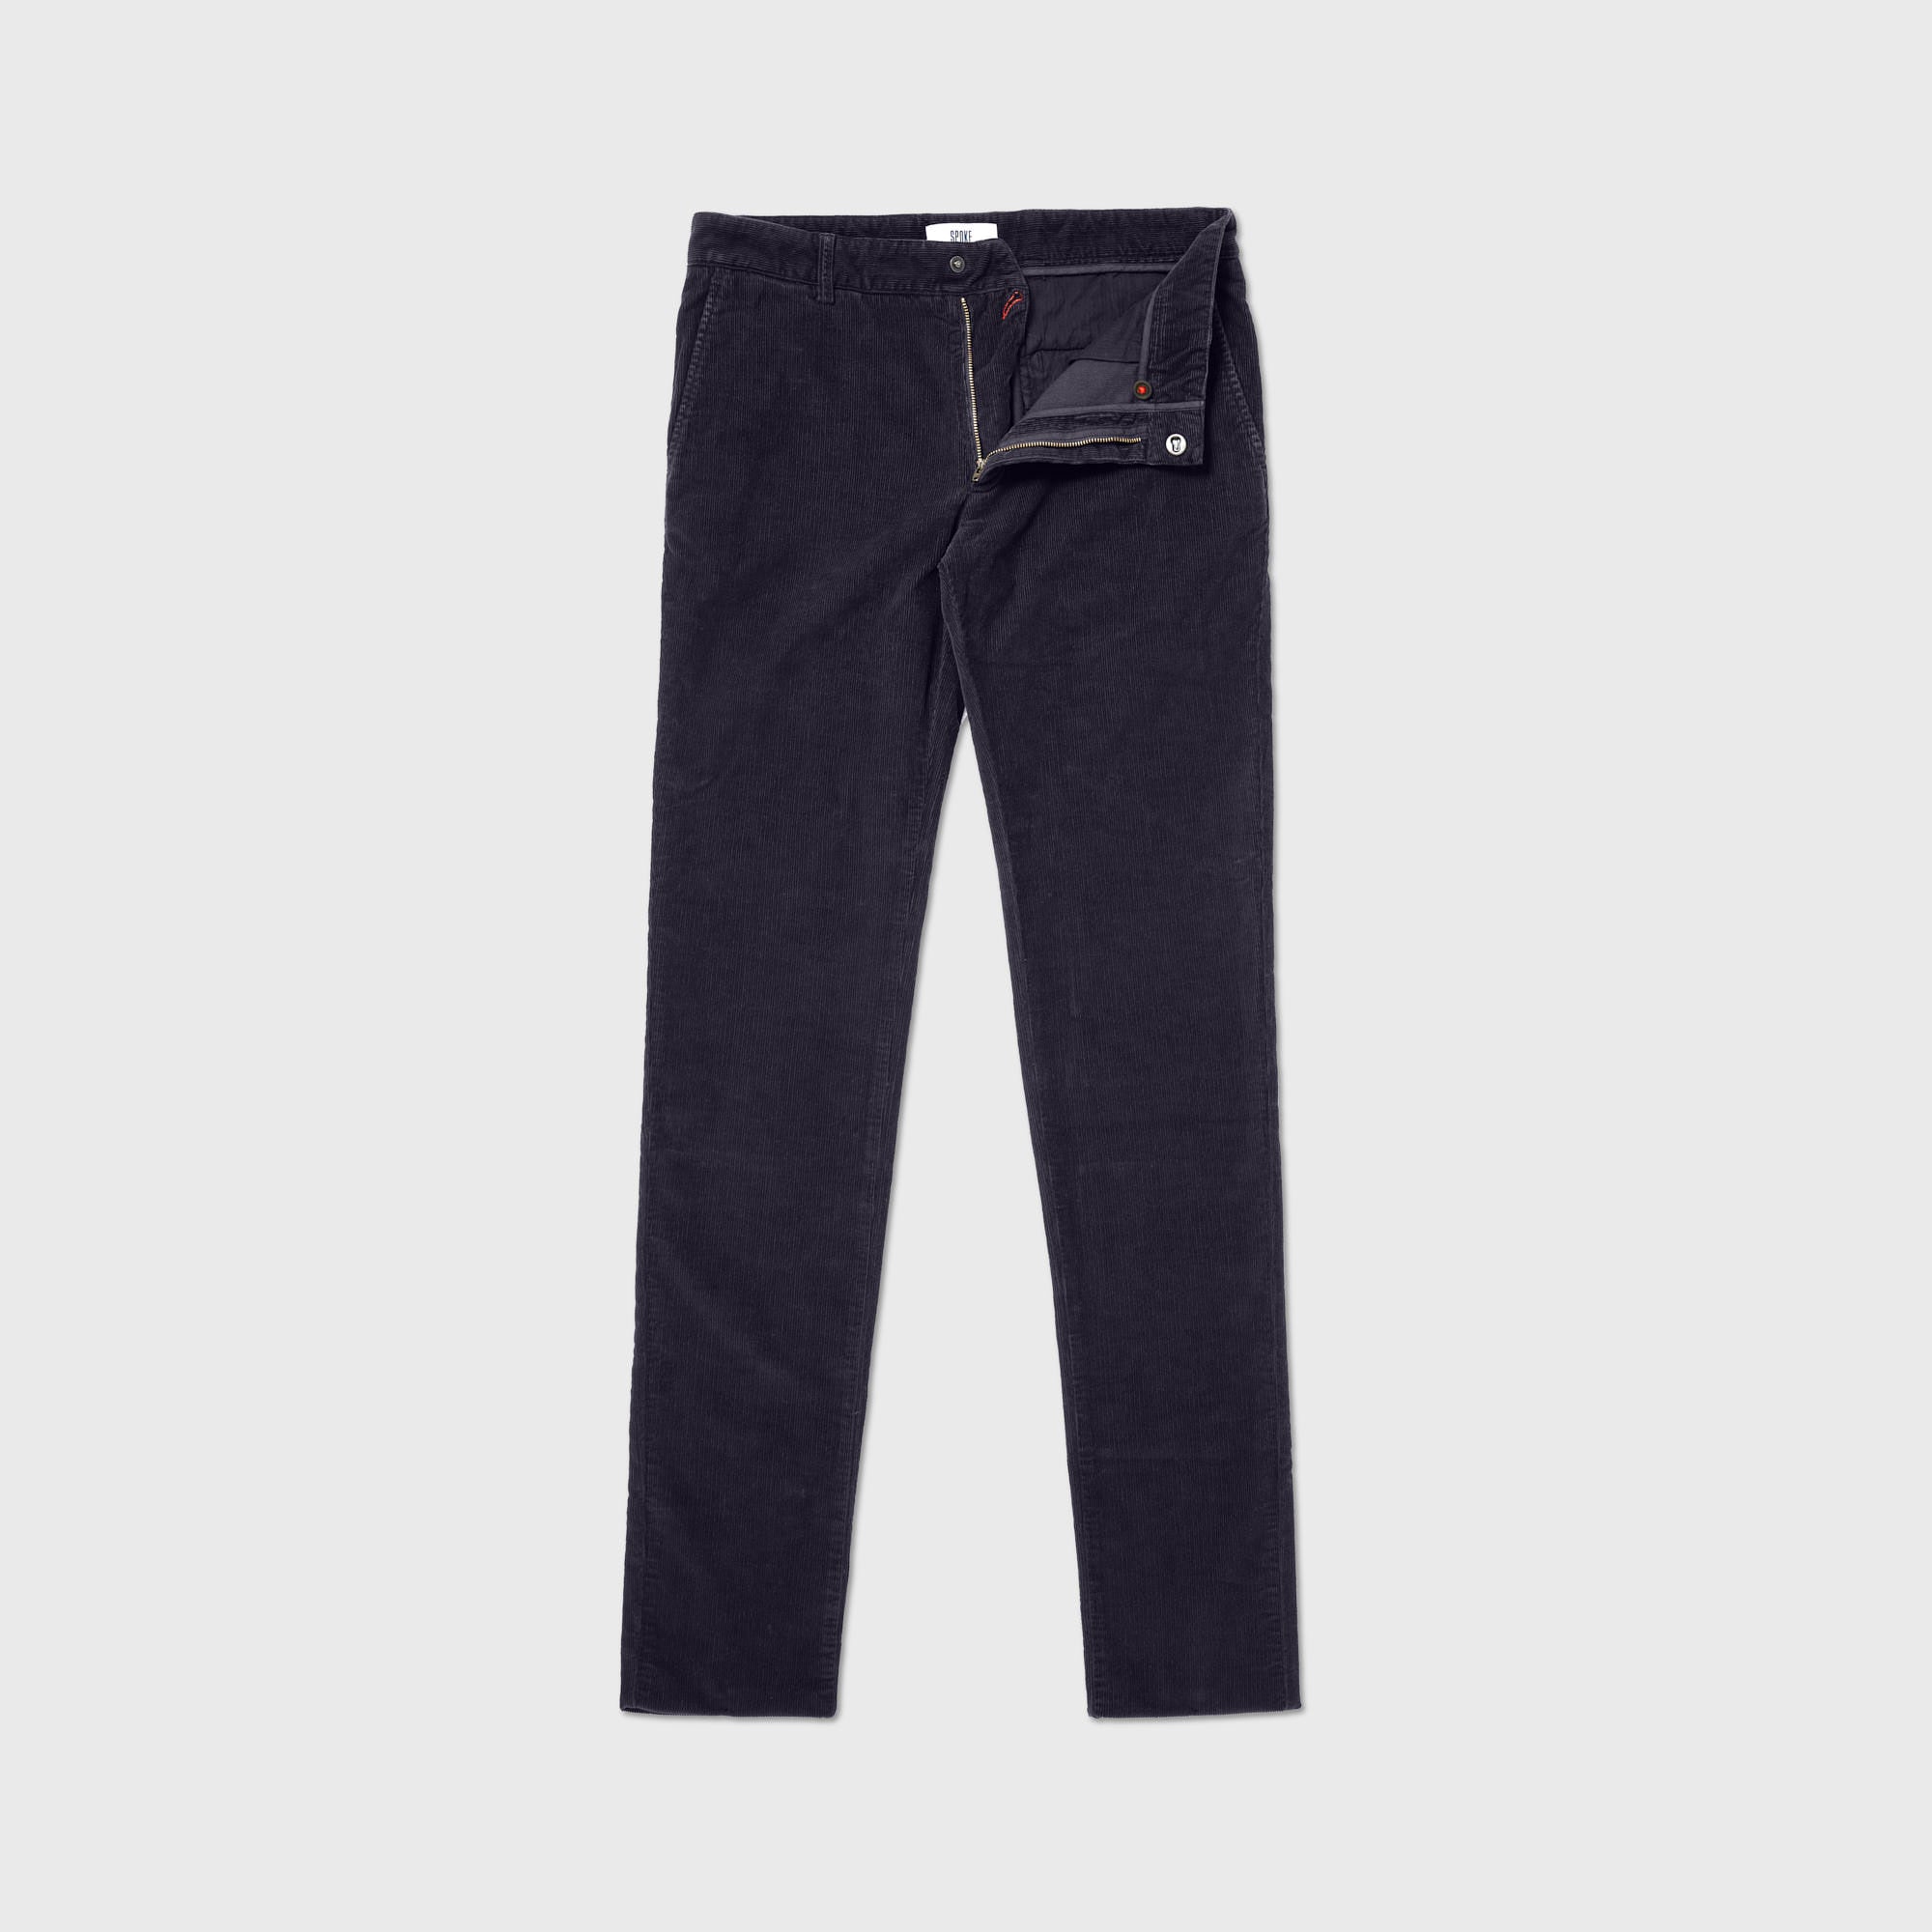 Buy Tapered Fit Corduroy Trousers Online at Best Prices in India - JioMart.